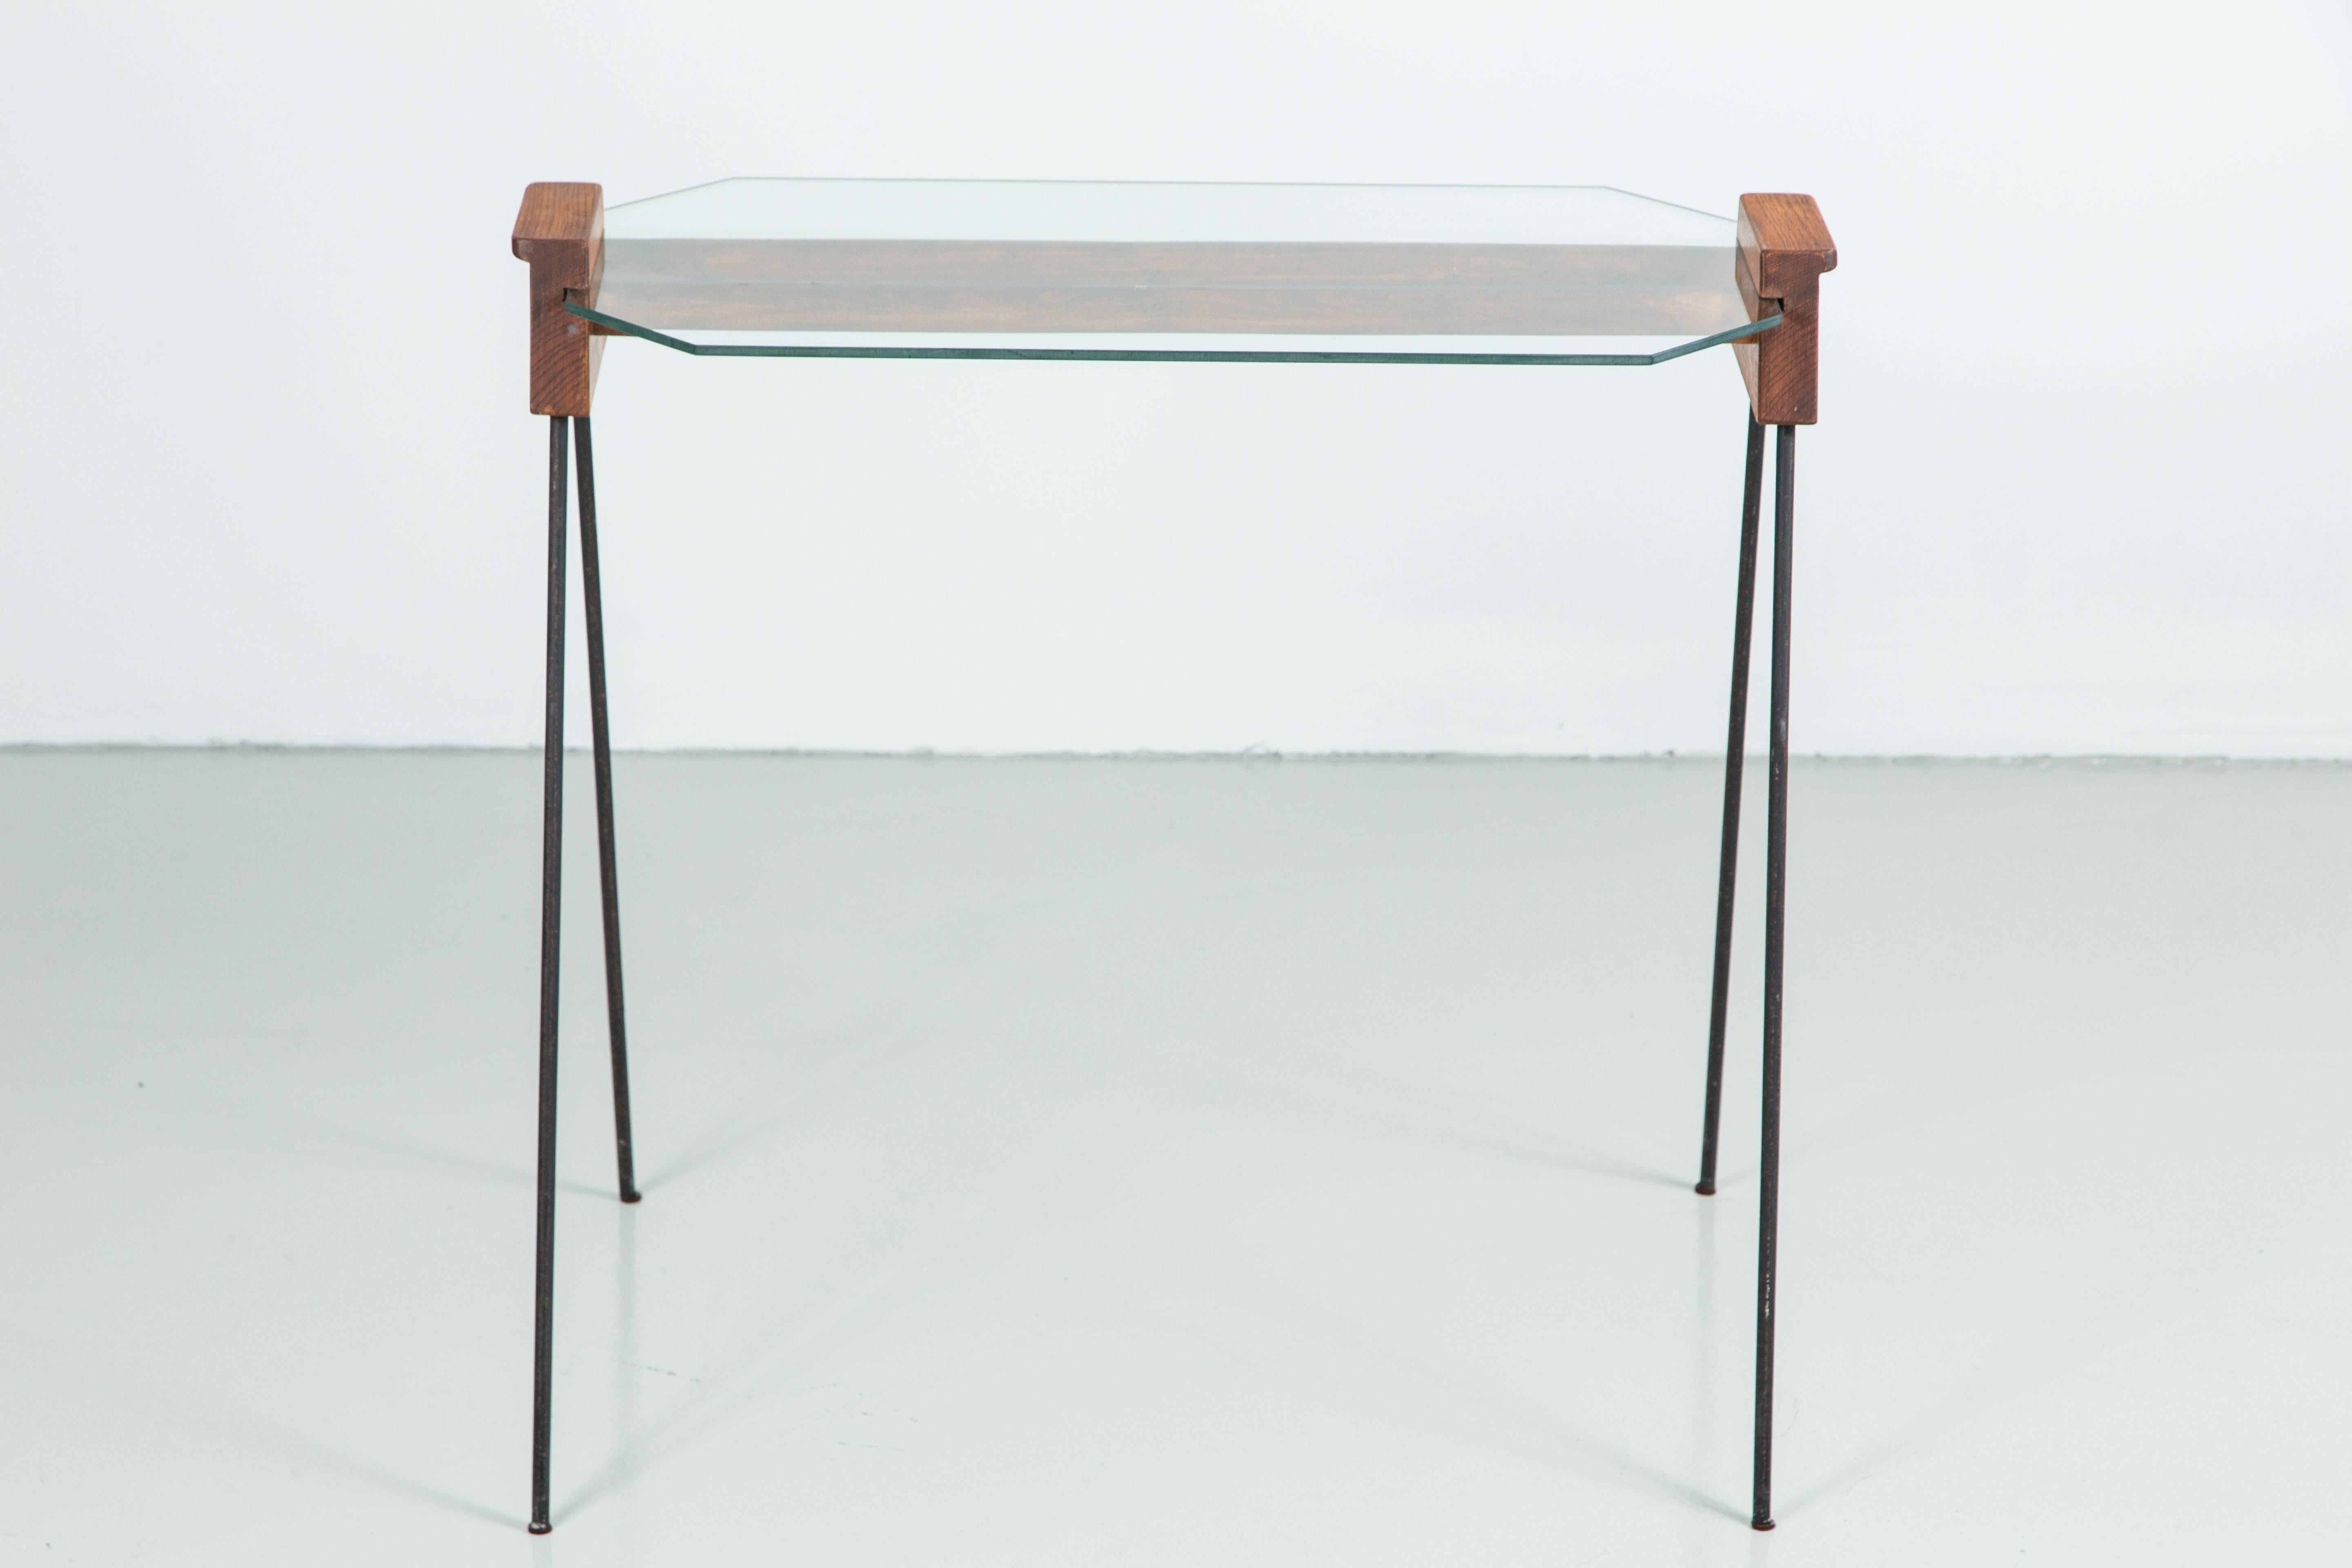 Great stylish table in the style of Arthur Umanoff with simple black iron legs, wood slatted detail and glass top.